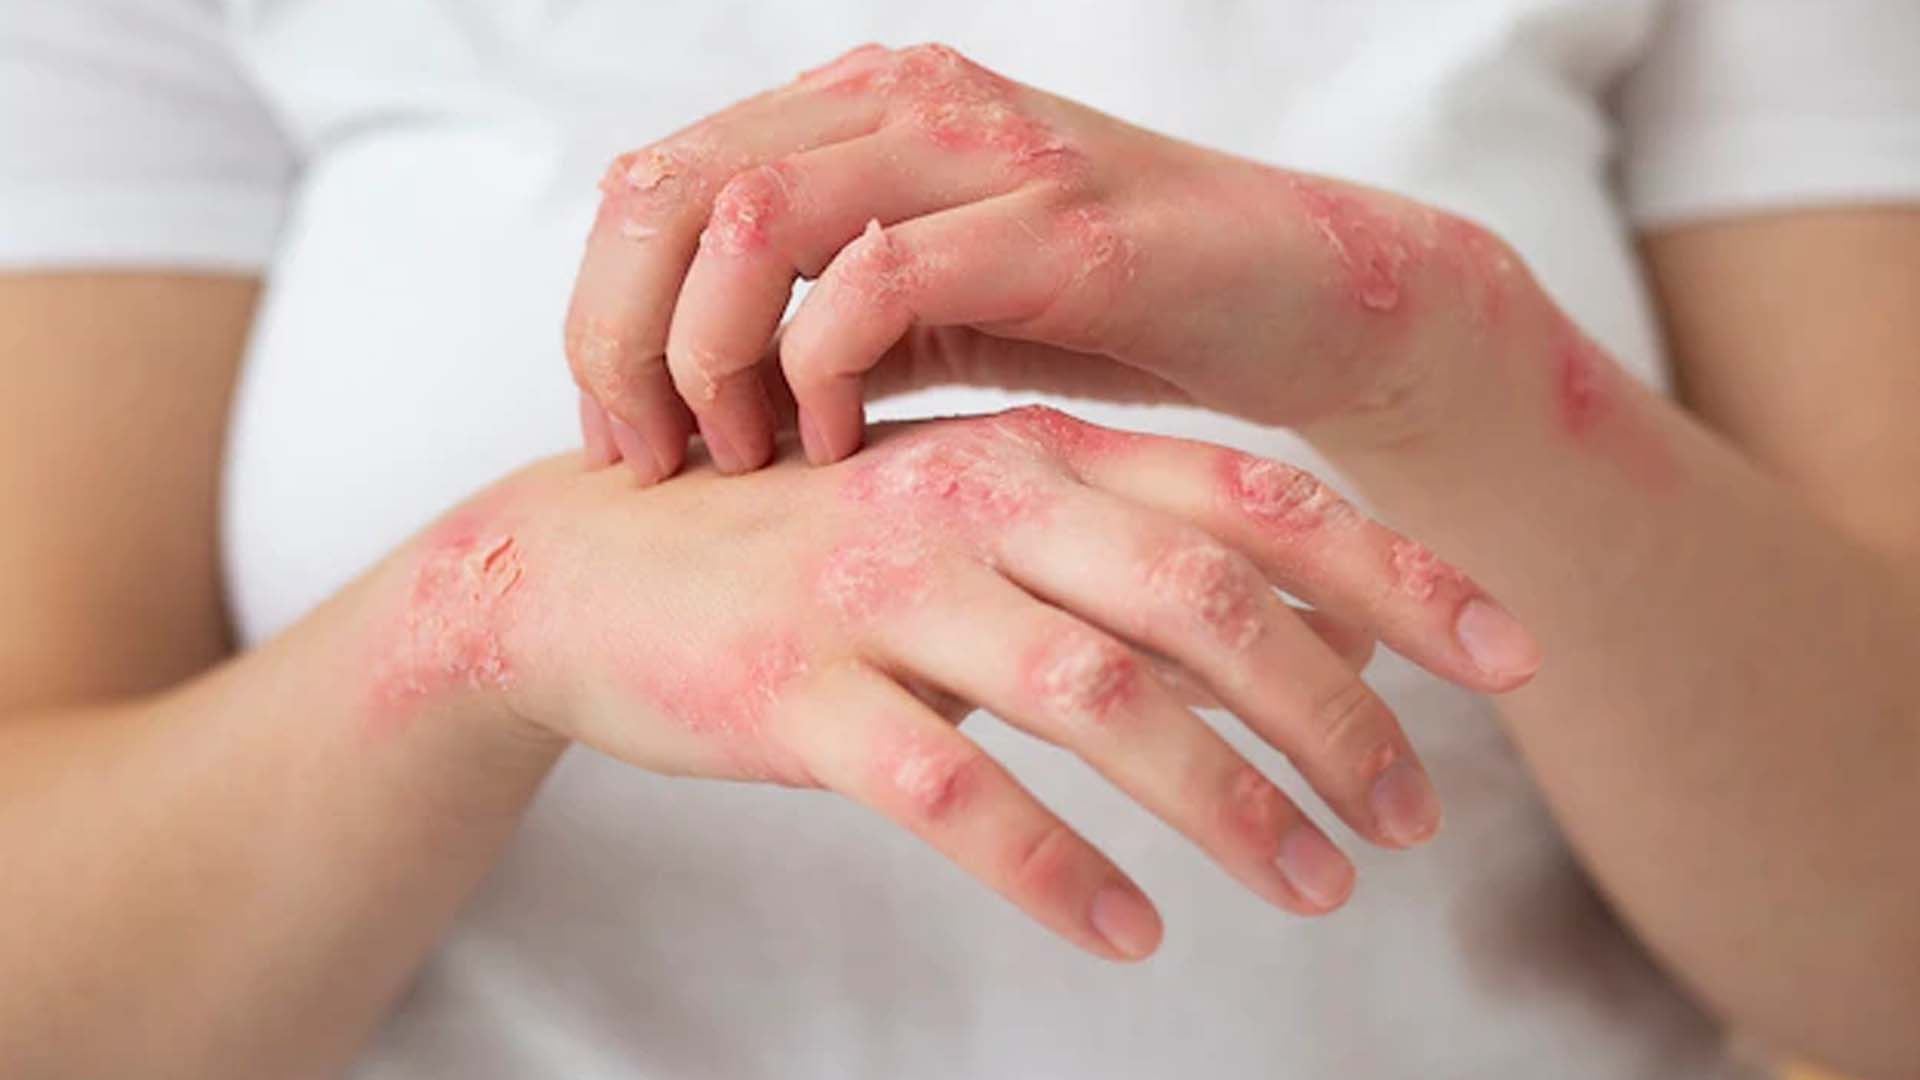 Skin Diseases: Types, Symptoms, Diagnosis, Treatment and Diet